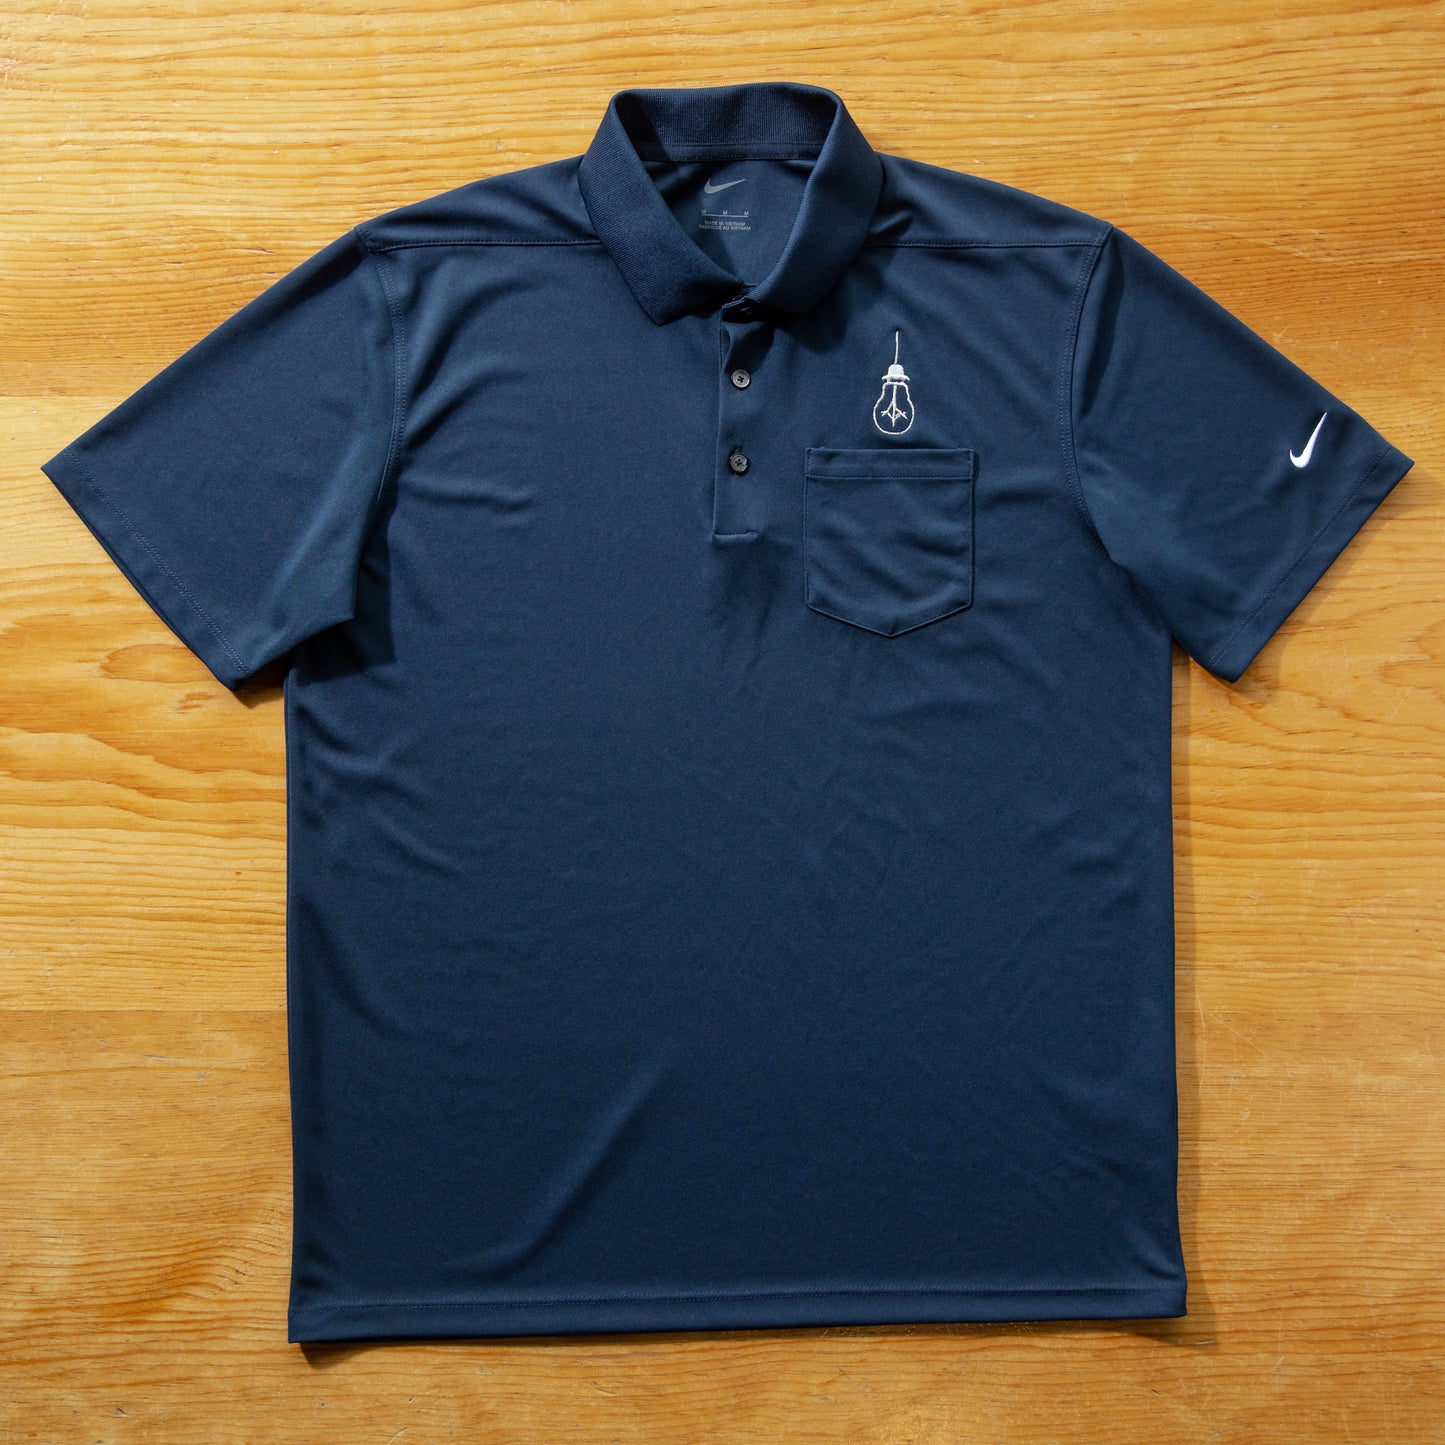 Nike Light Bulb Polo – Side Project Brewing